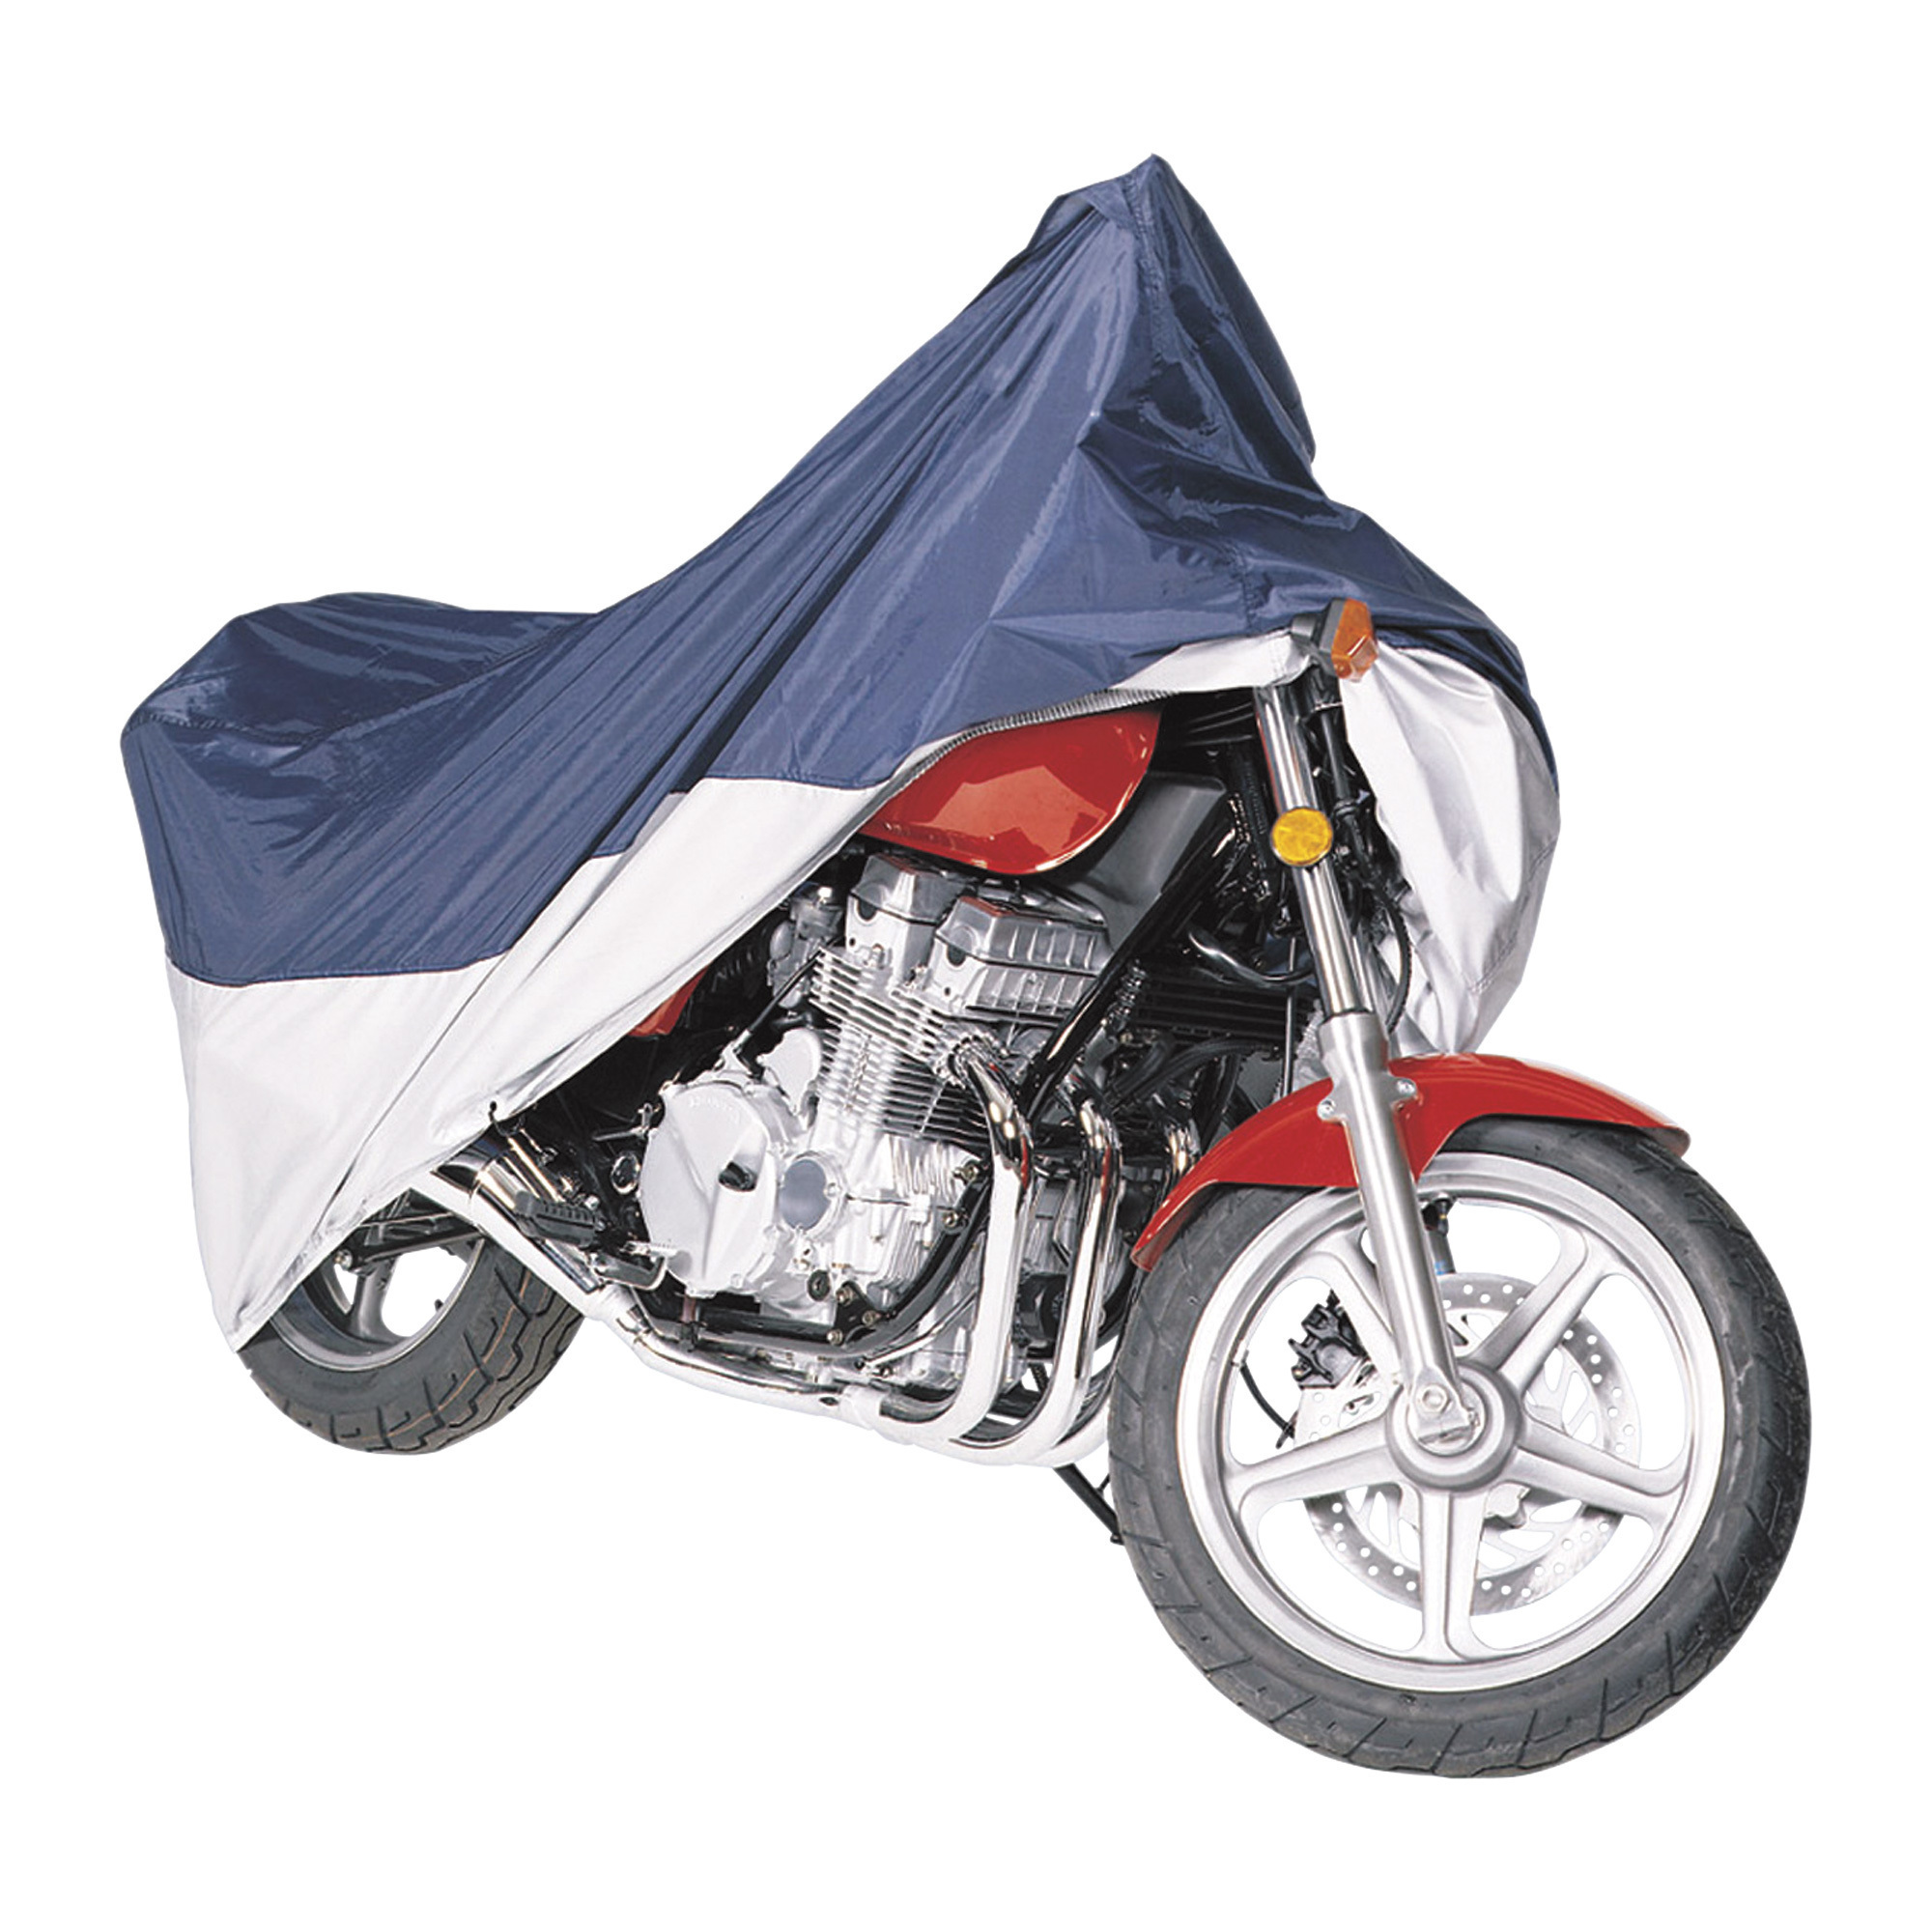 MotoGear Motorcycle Cover – Large, Blue and Silver, Fits Motorcycles up to 1,100cc, Model - Classic Accessories 65-005-033501-00